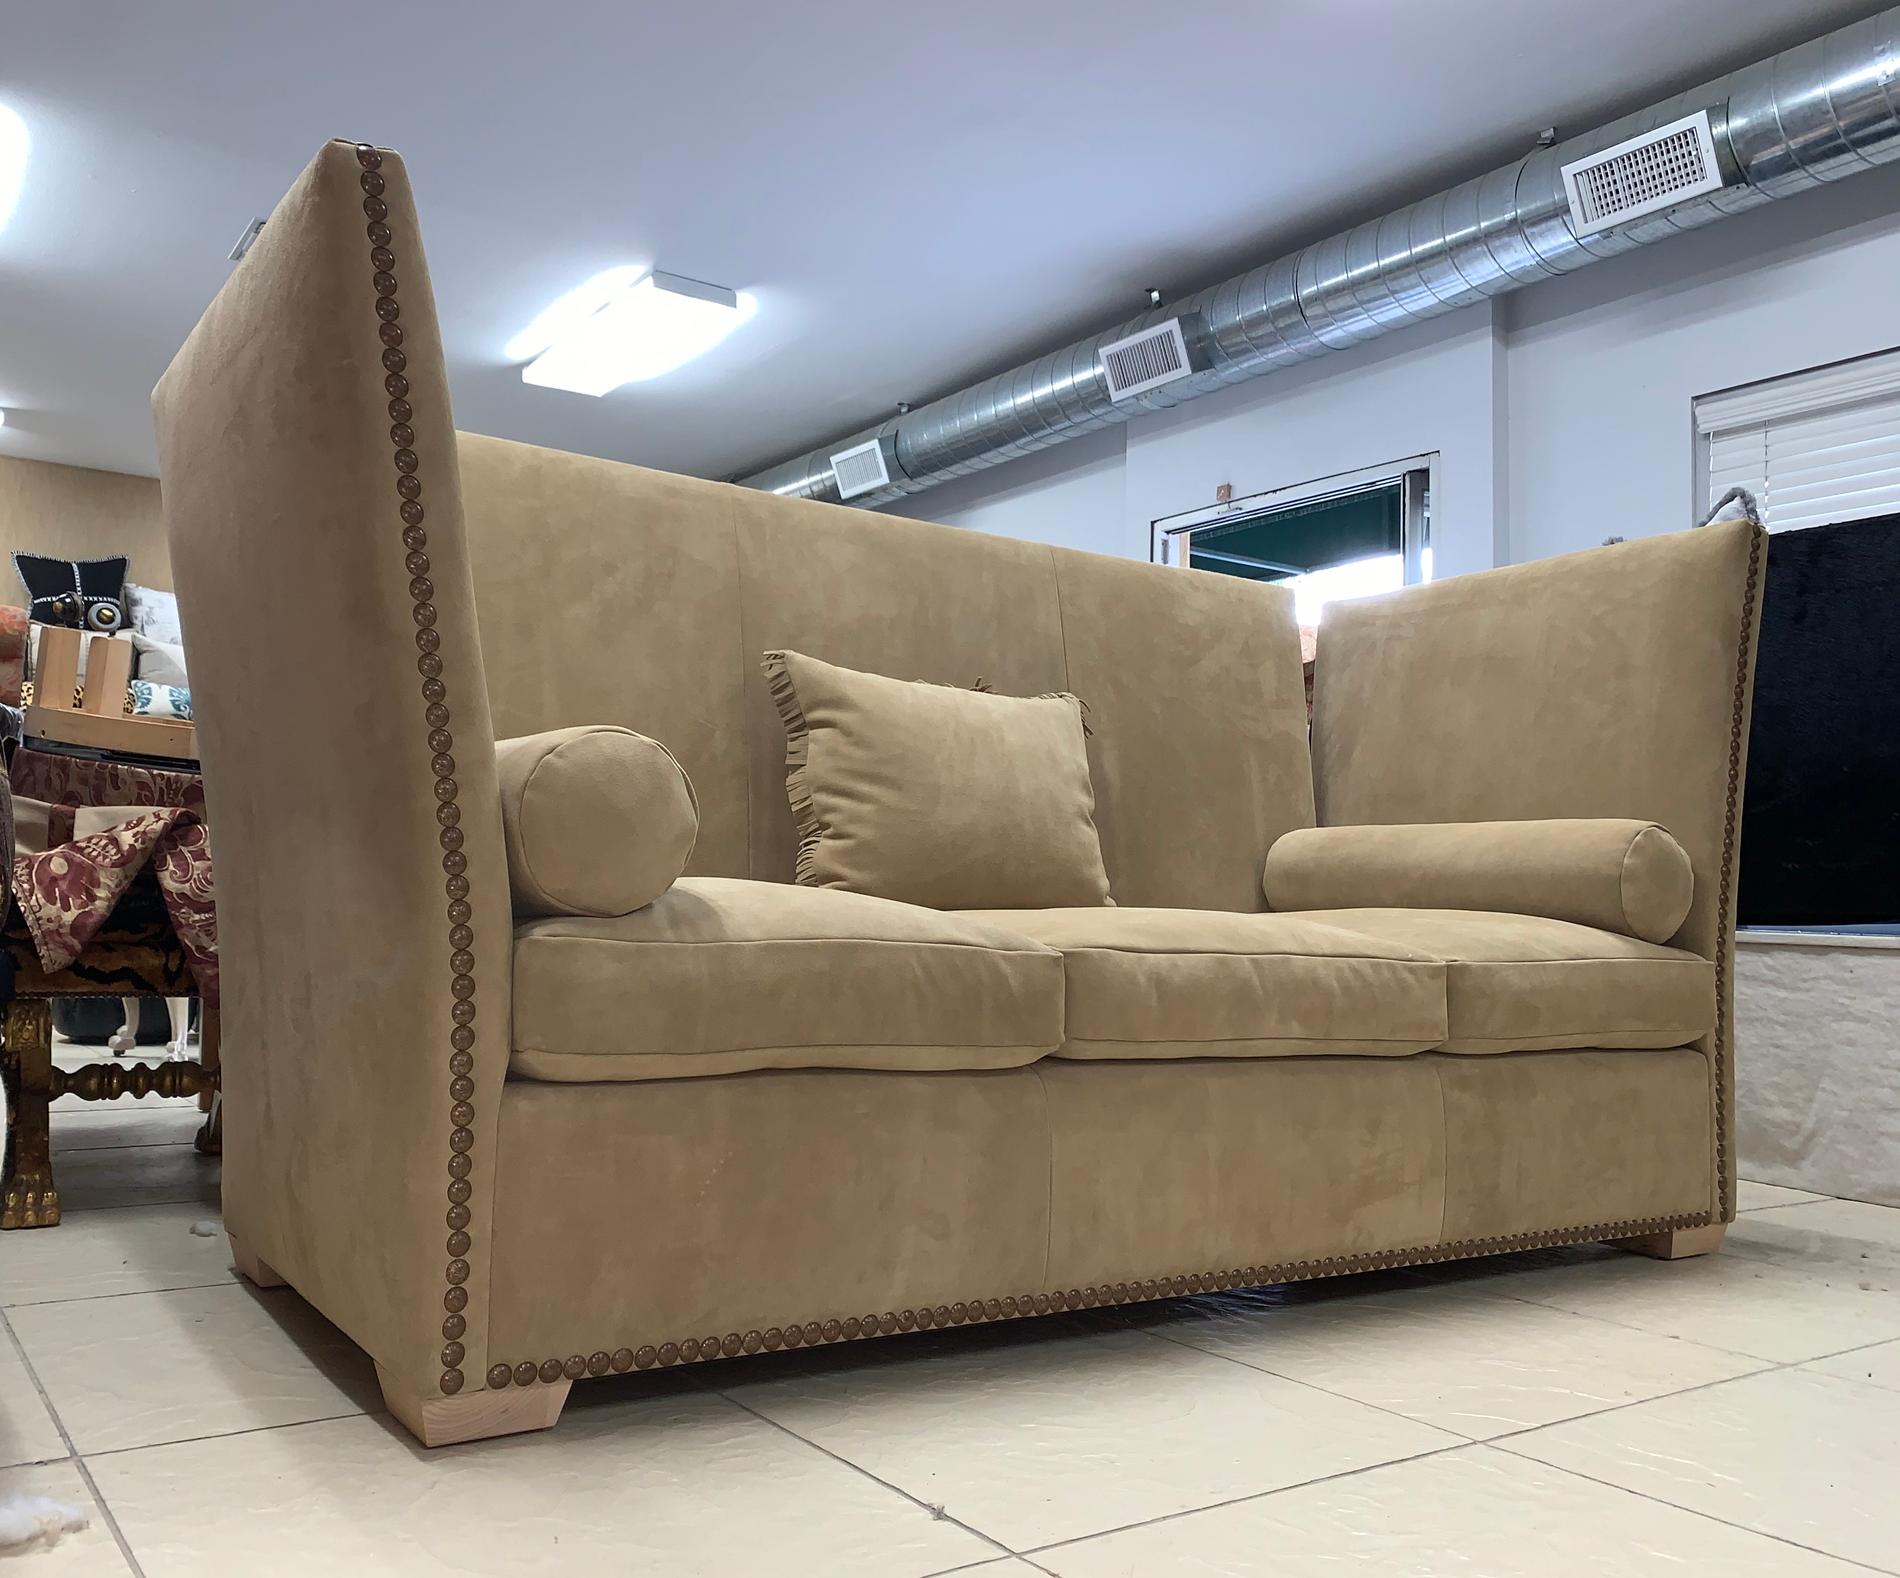 3-Seat Sofa in the Knole Style Upholstered in Brown Suede (amerikanisch)